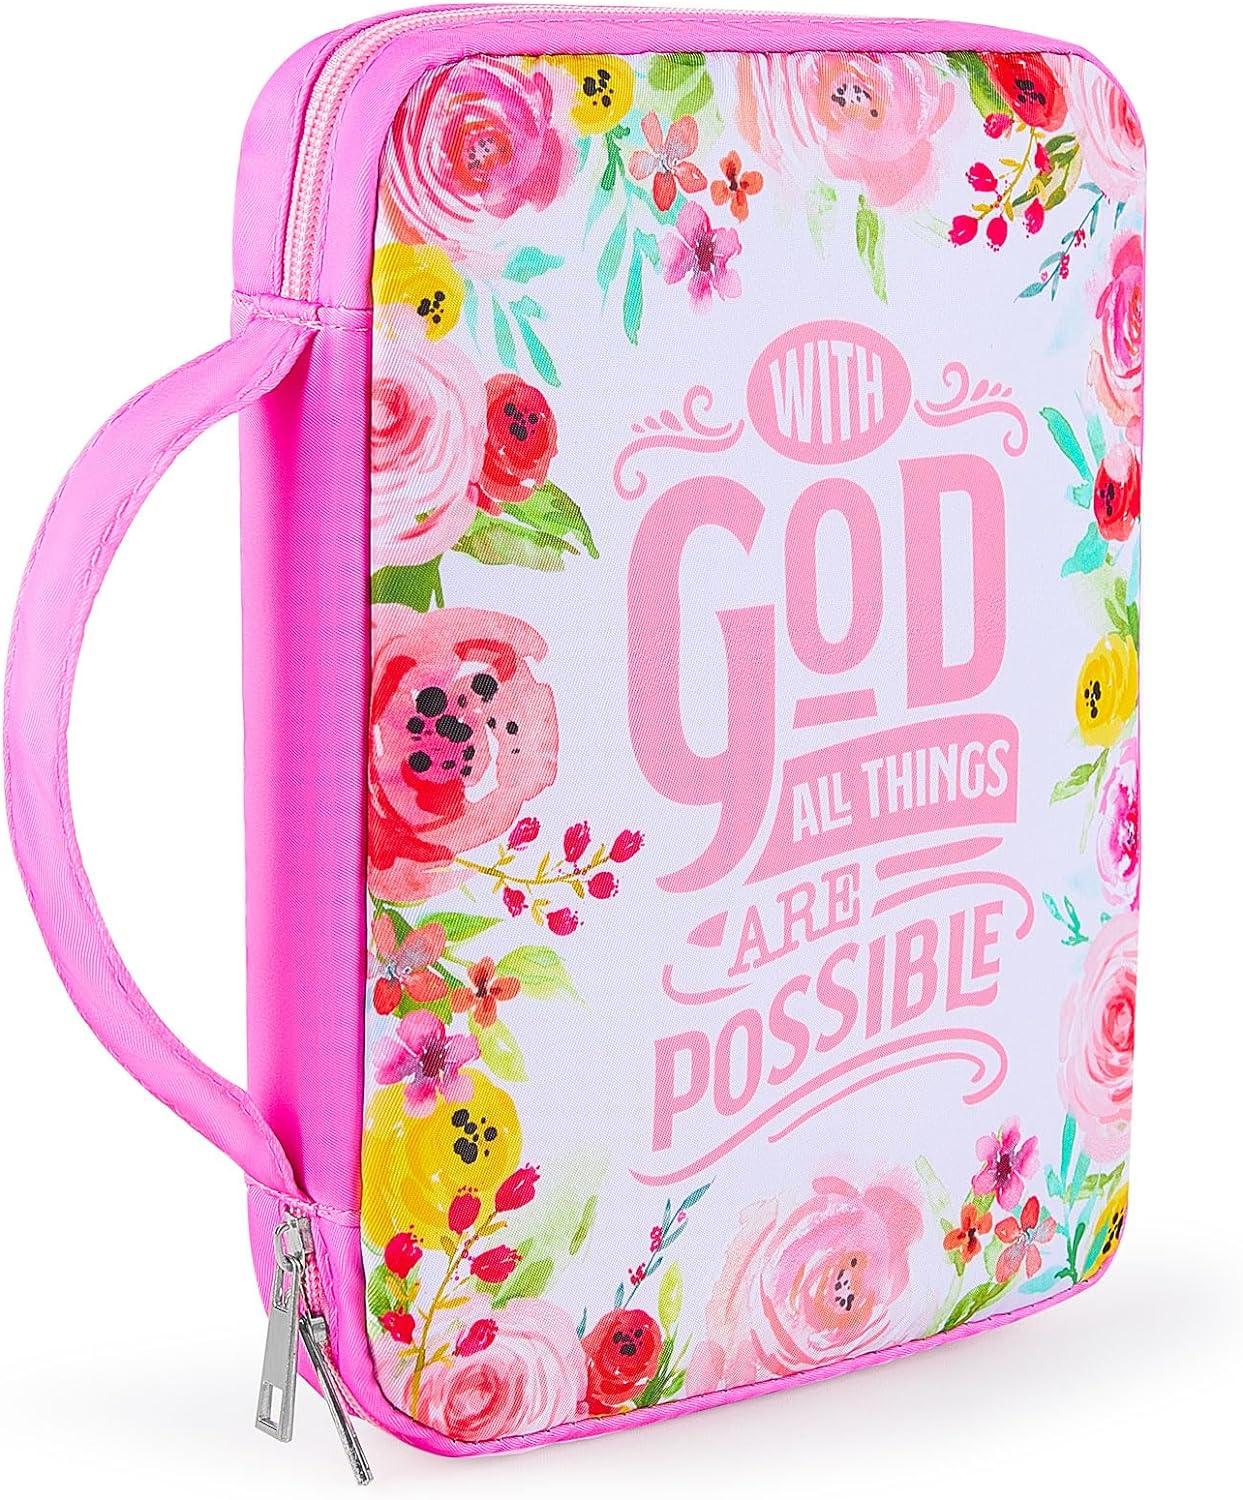 icosy bible covers for women girls kids bible case large bible tote bag with handle bible journaling supplies